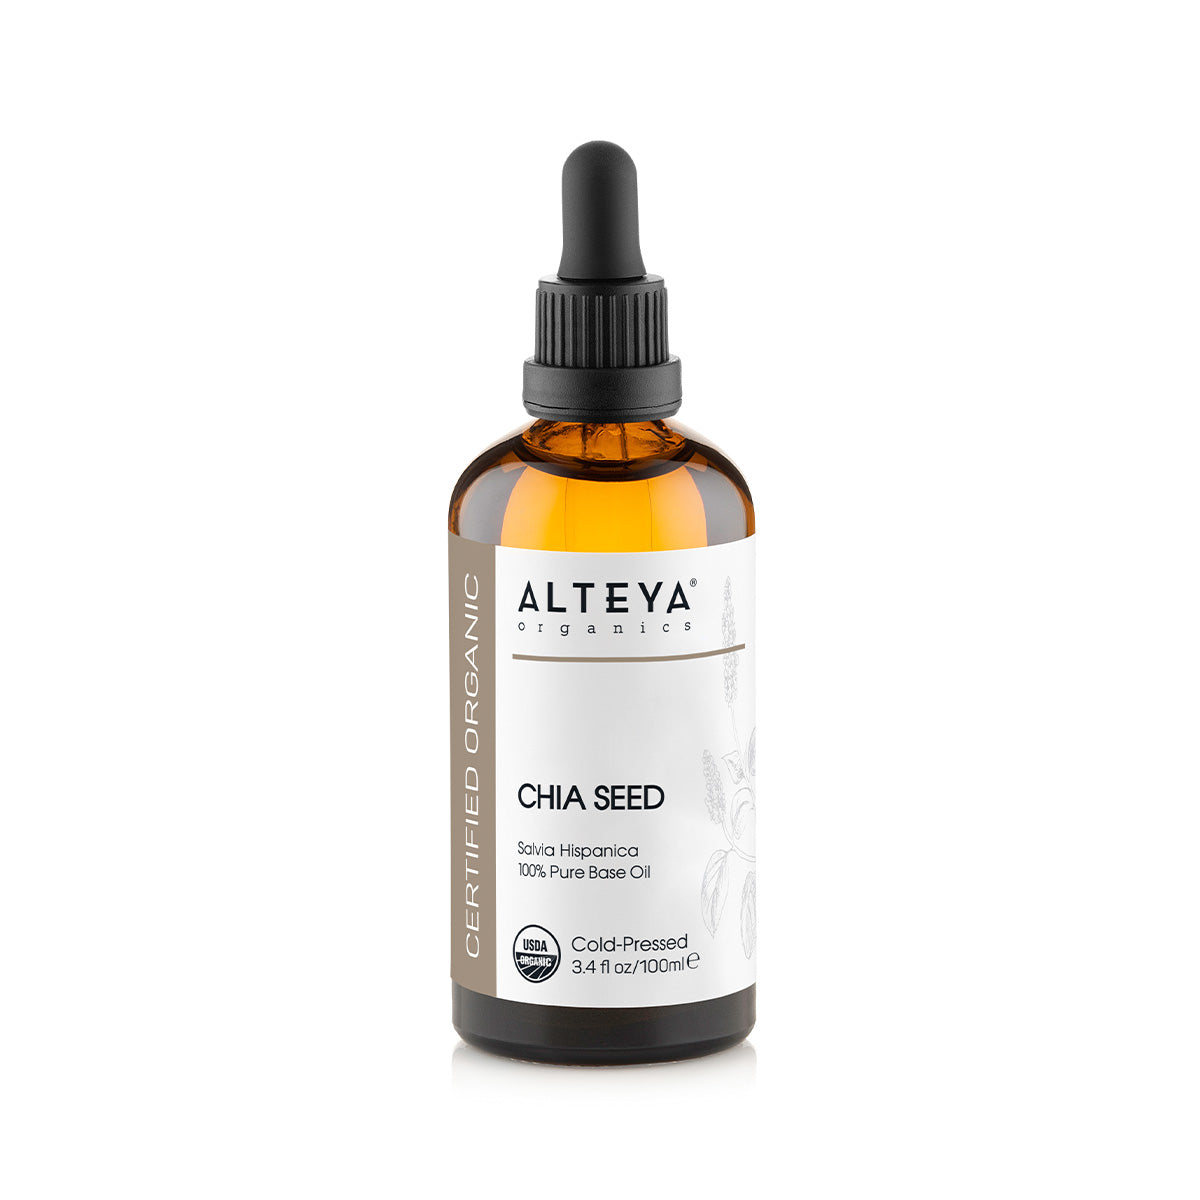 An Alteya Organics bottle of Organic Chia Carrier Oil for skincare and hair care.